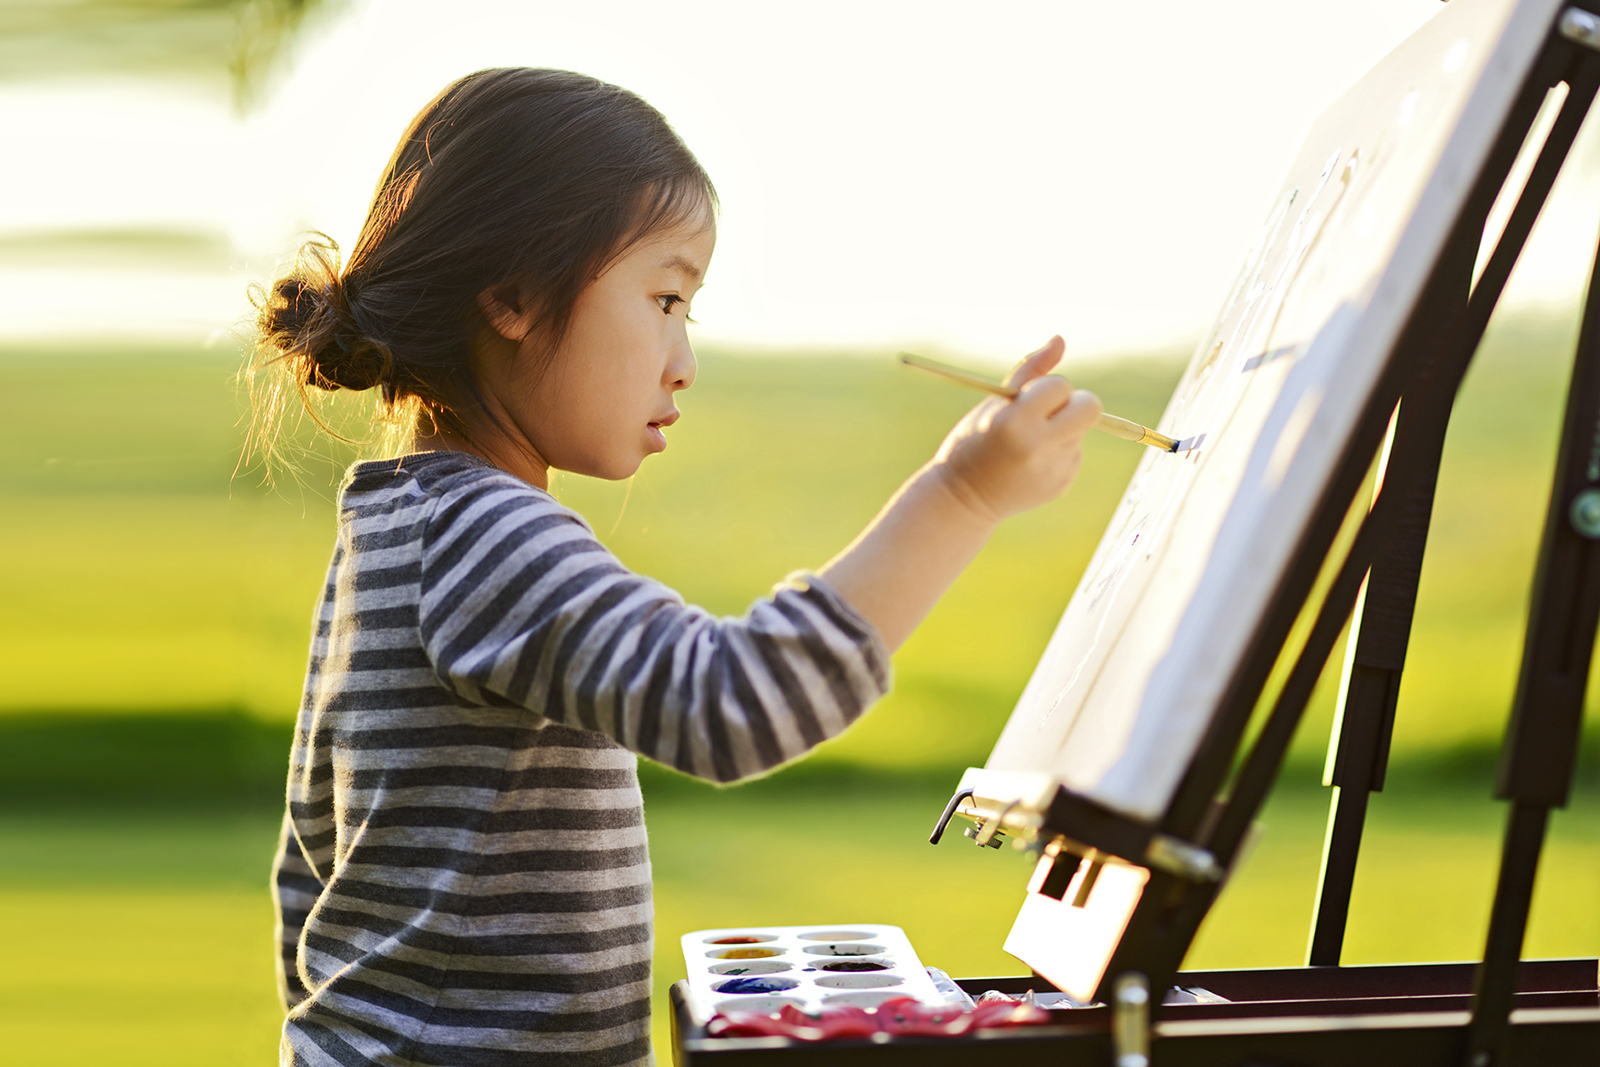 Are You a General Knowledge Genius? Quiz The young artist